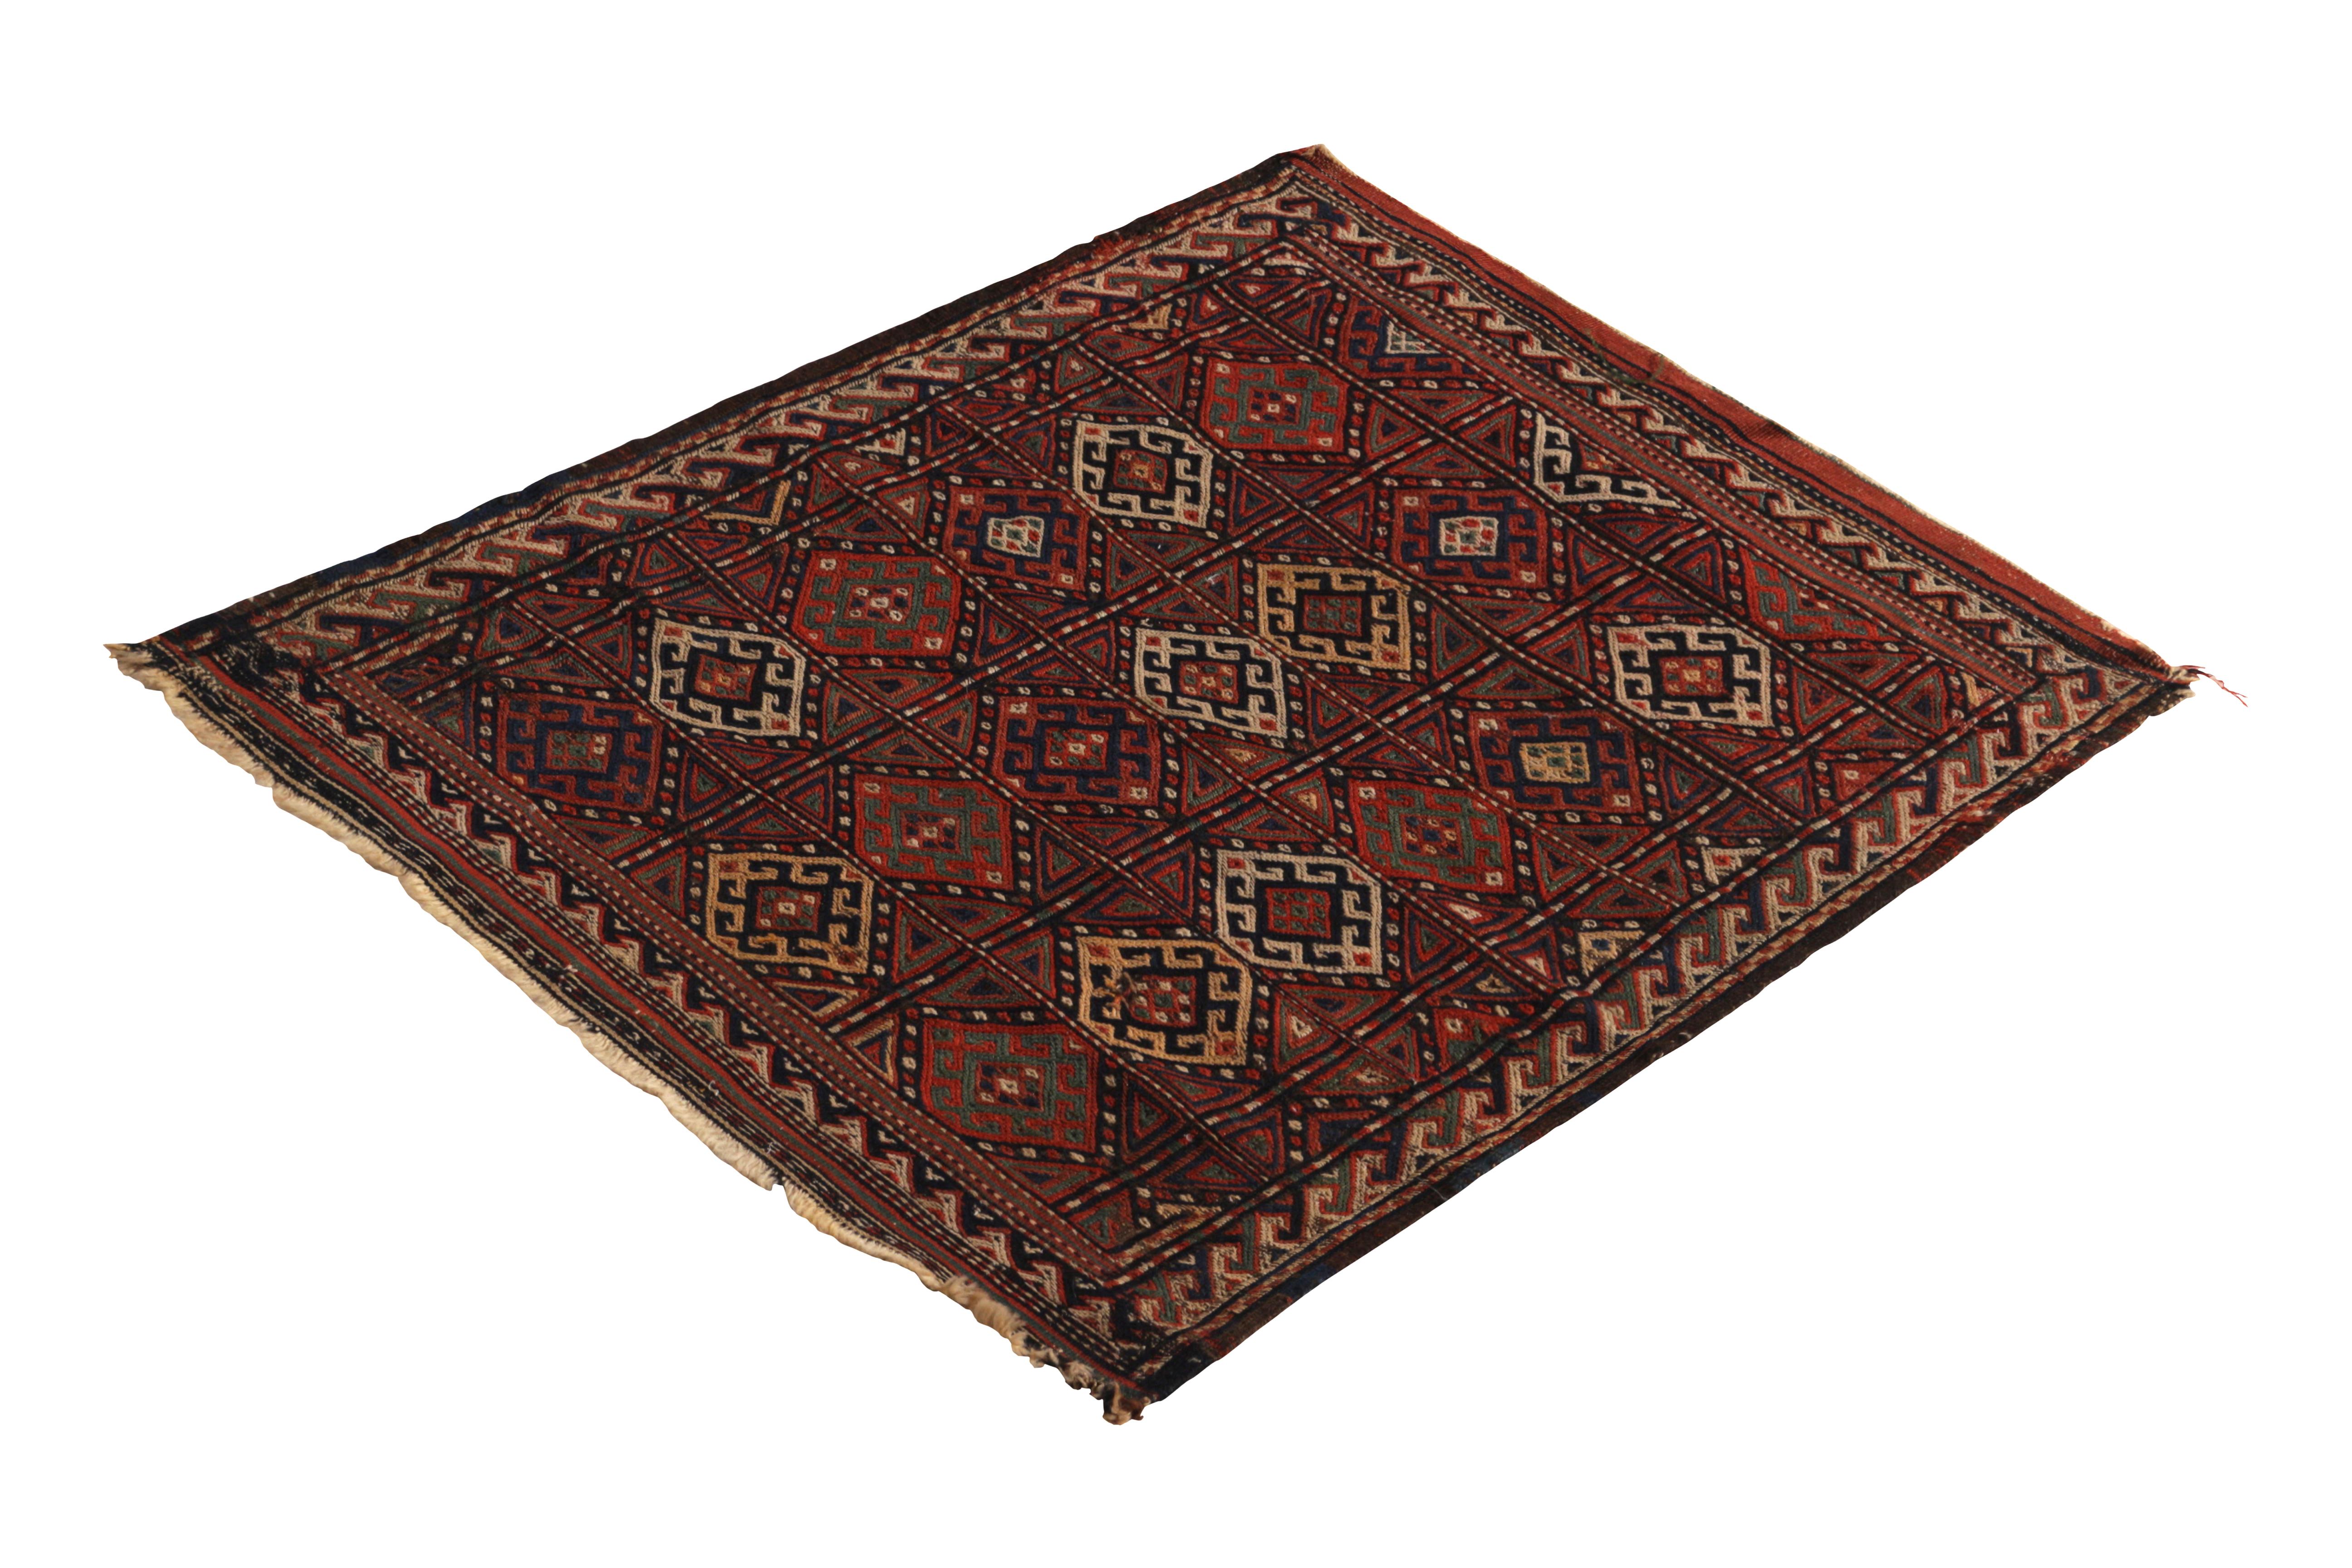 Handwoven in wool originating from Russia circa 1890-1900, this antique Kilim rug connotes a rare small-sized Sumak (also spelled Soumak) tribal design in conversely Classic red and blue hues favored in this era and region. Connoisseurs will note